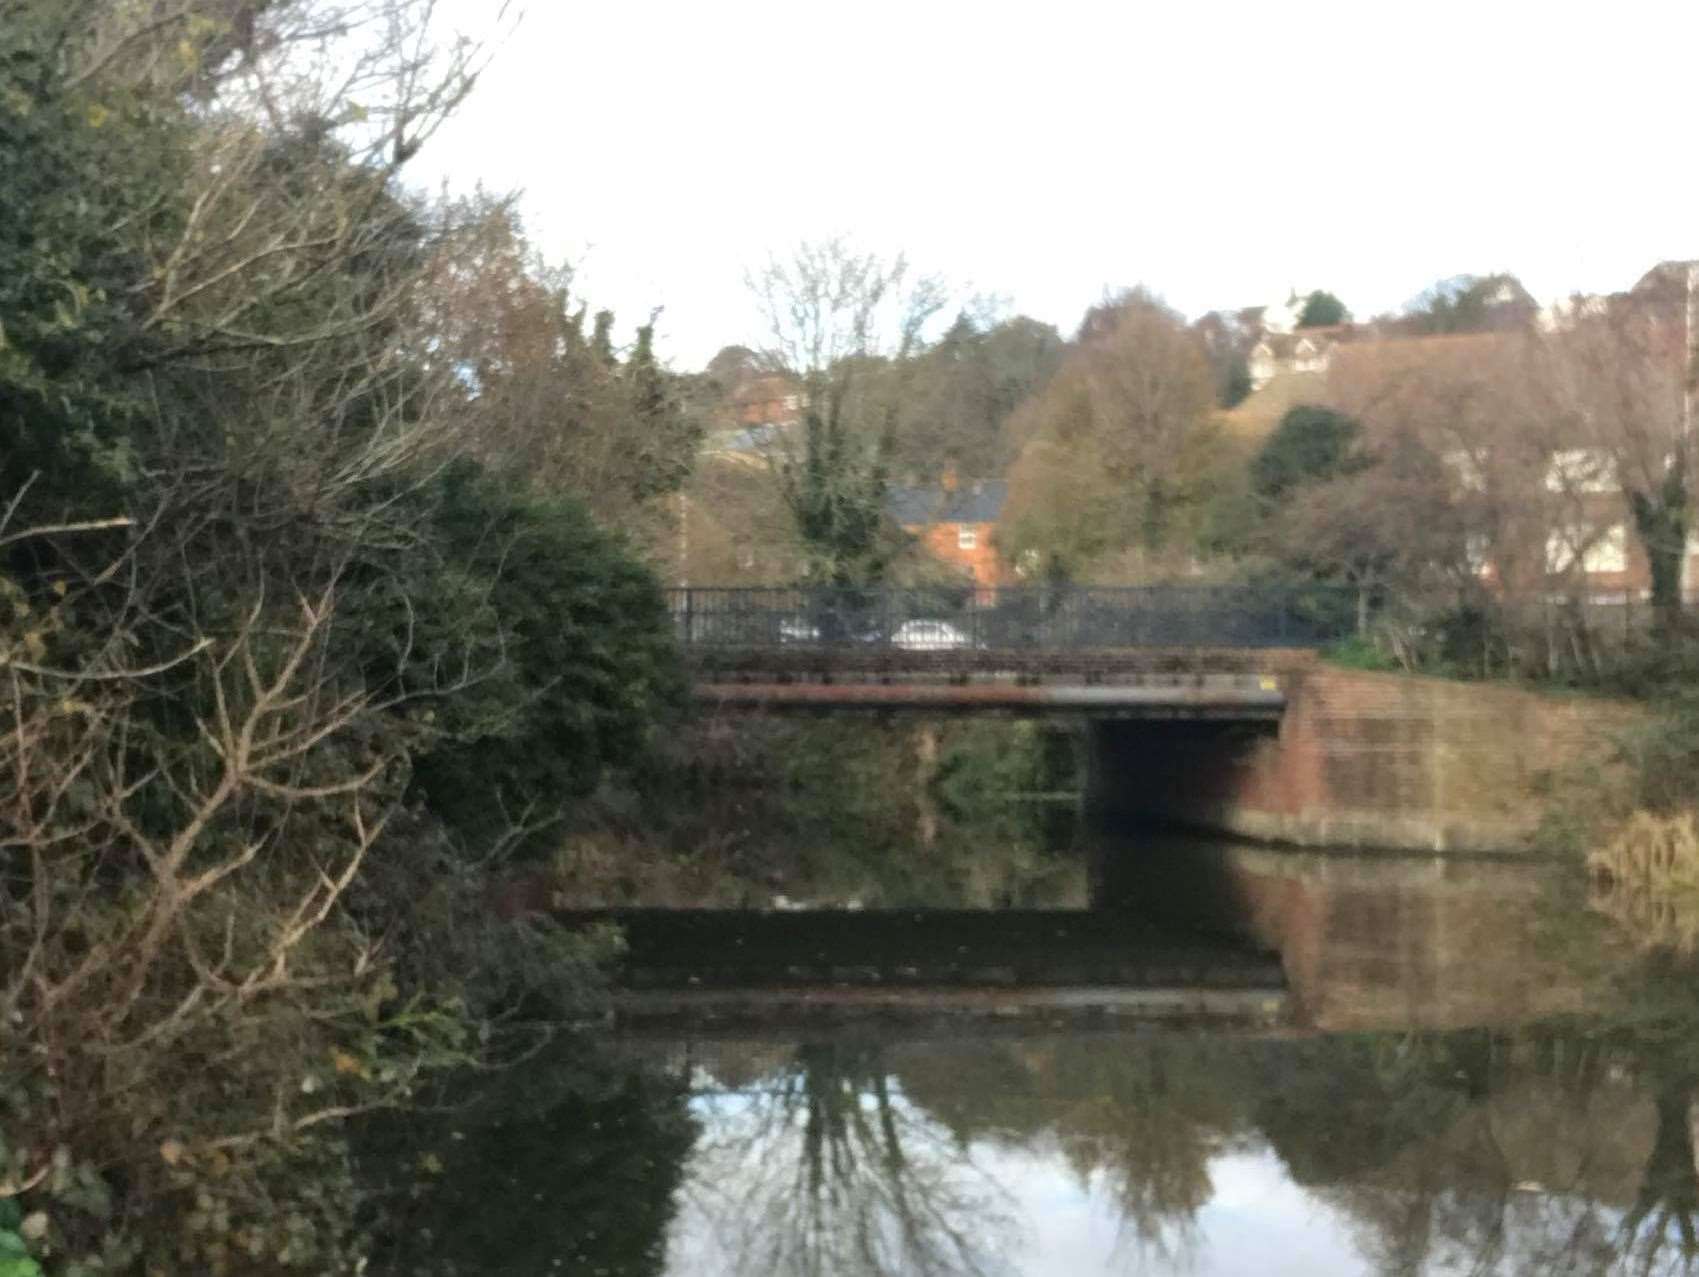 Police were called after the incident on this bridge on Saturday night